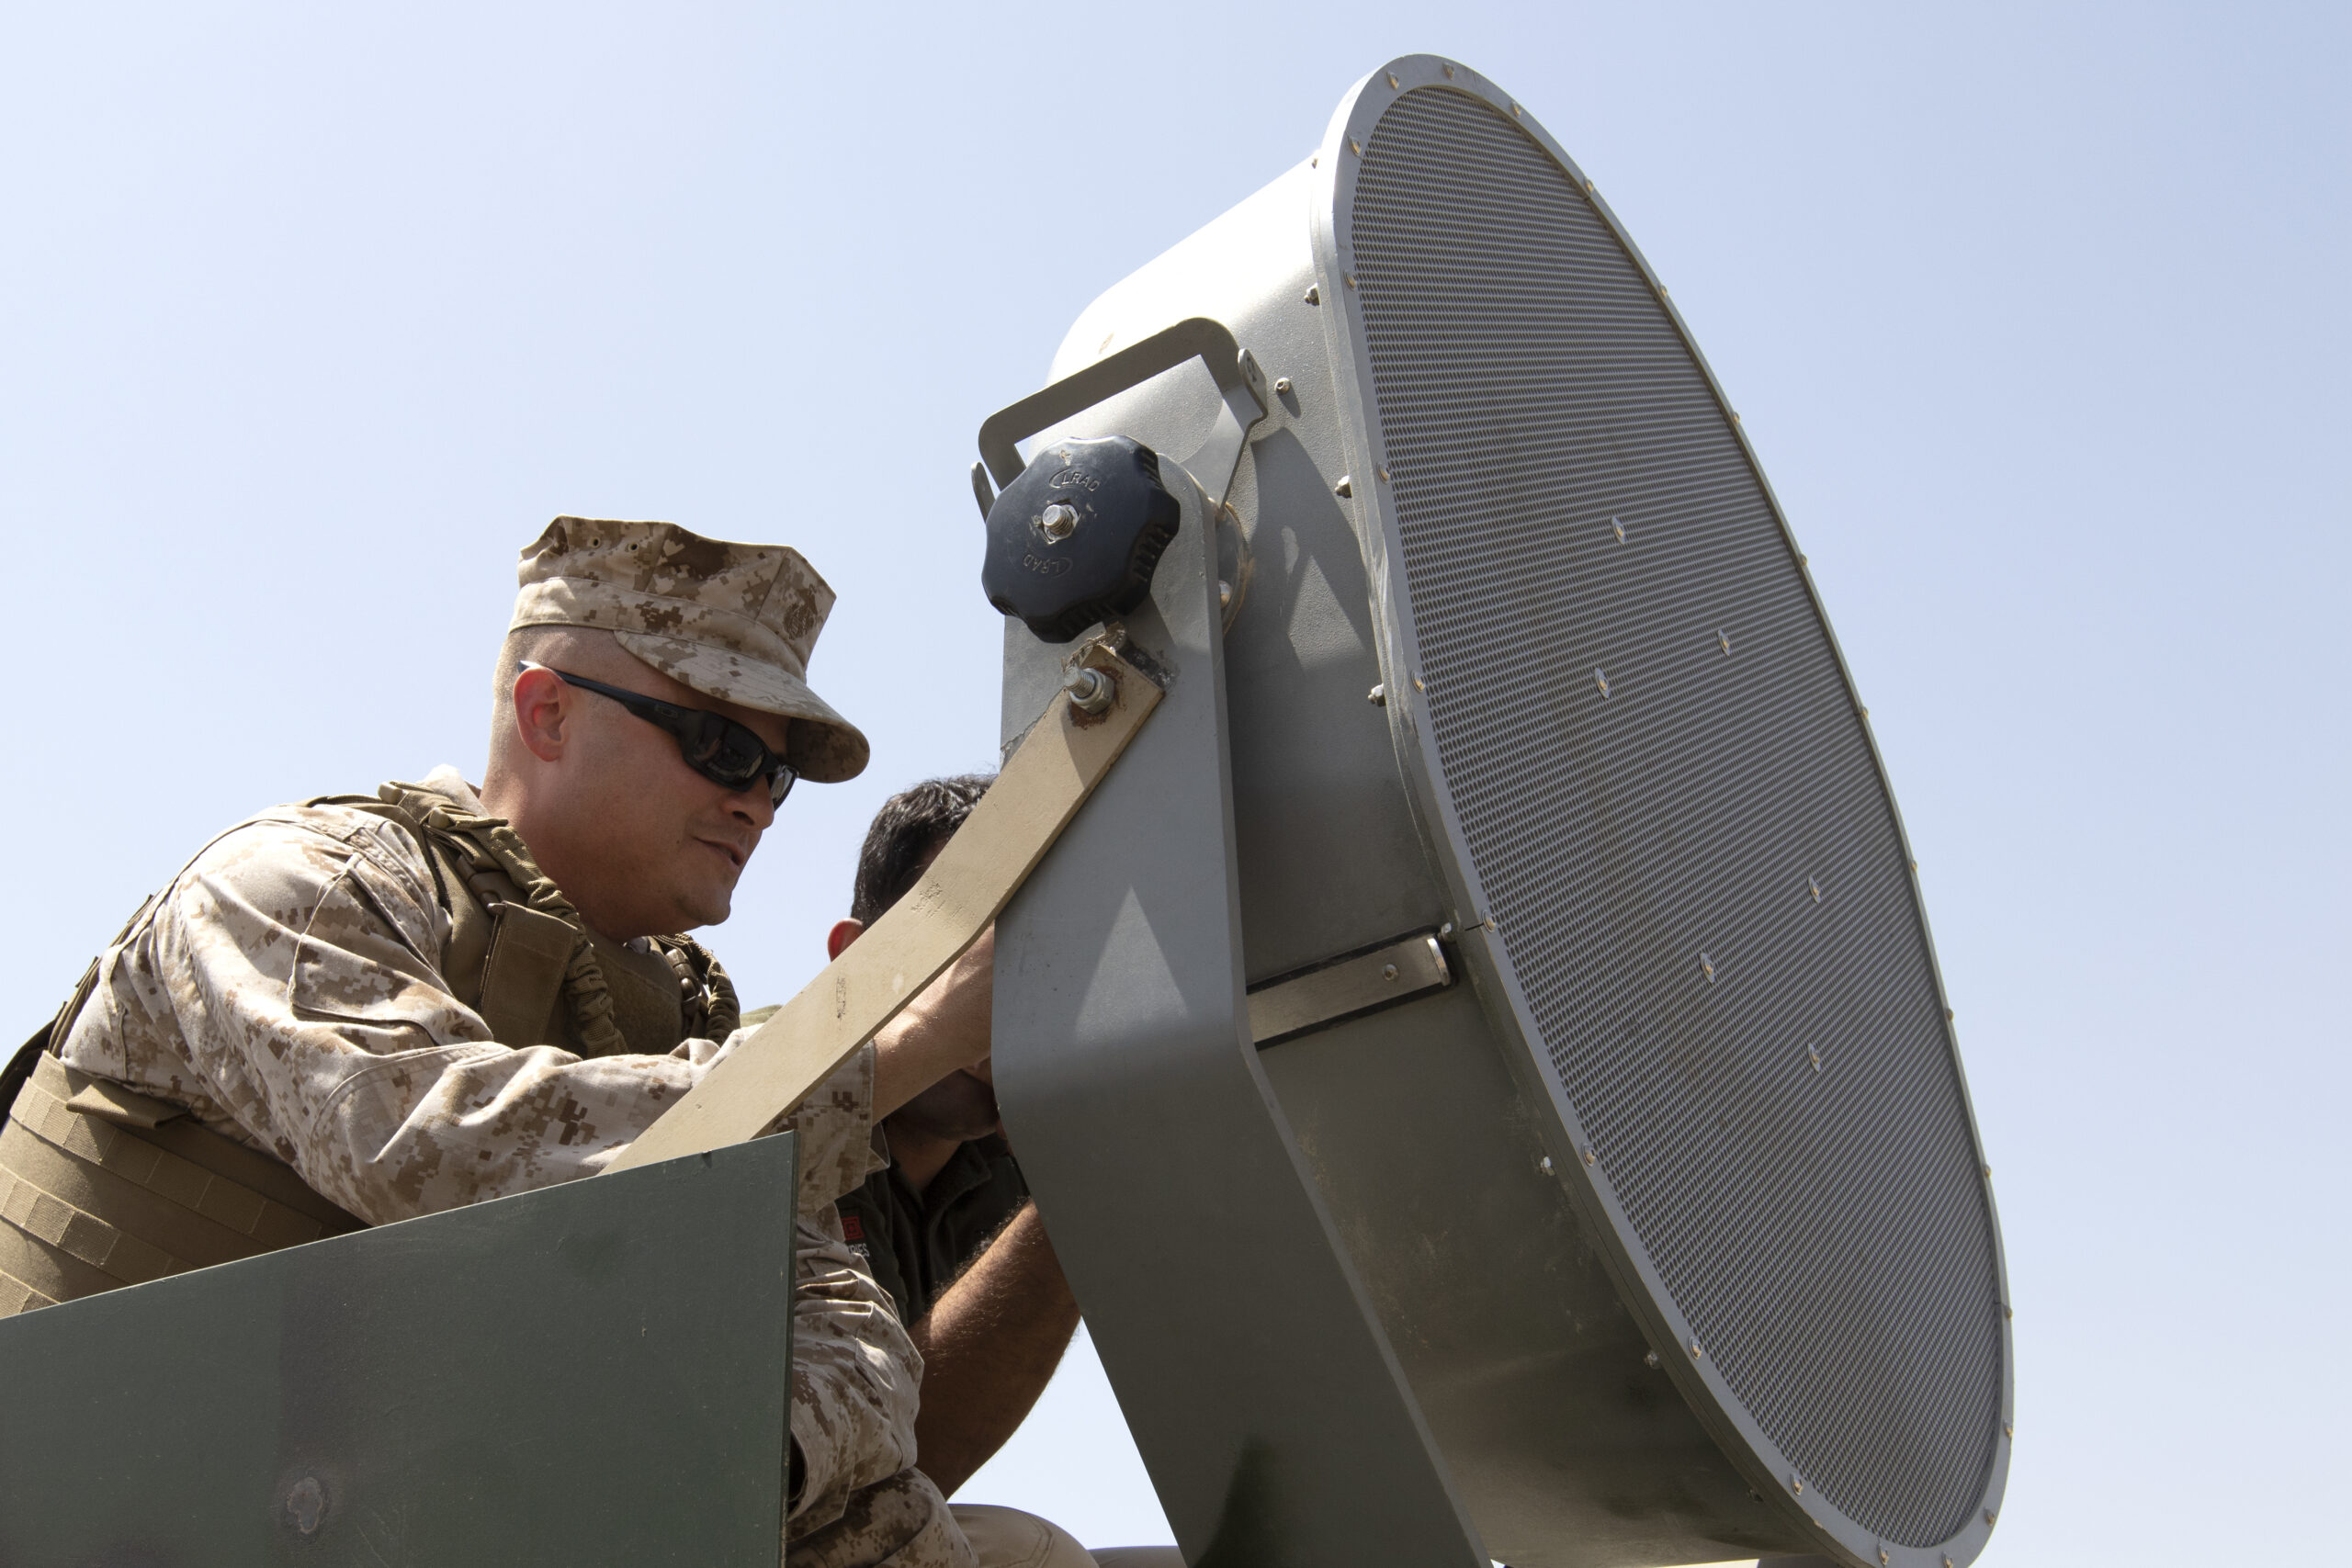 Gunnery Sgt. John Ciupak, an instructor for the VOCALIS training program, prepares a Long Range Acoustic Device at the Iraqi Ground Forces Command Headquarters in Baghdad, July 11, 2018. VOCALIS is an organization that works with the Combined Joint Task Force- Operation Inherent Resolve and tasked with building partnership capacity between the Coalition Forces and Iraqi government. The VOCALIS program is comprised of training packages taught by military and contractor activities, including a train the trainer program. (U.S. Army photo taken by Sgt. Dennis Glass)